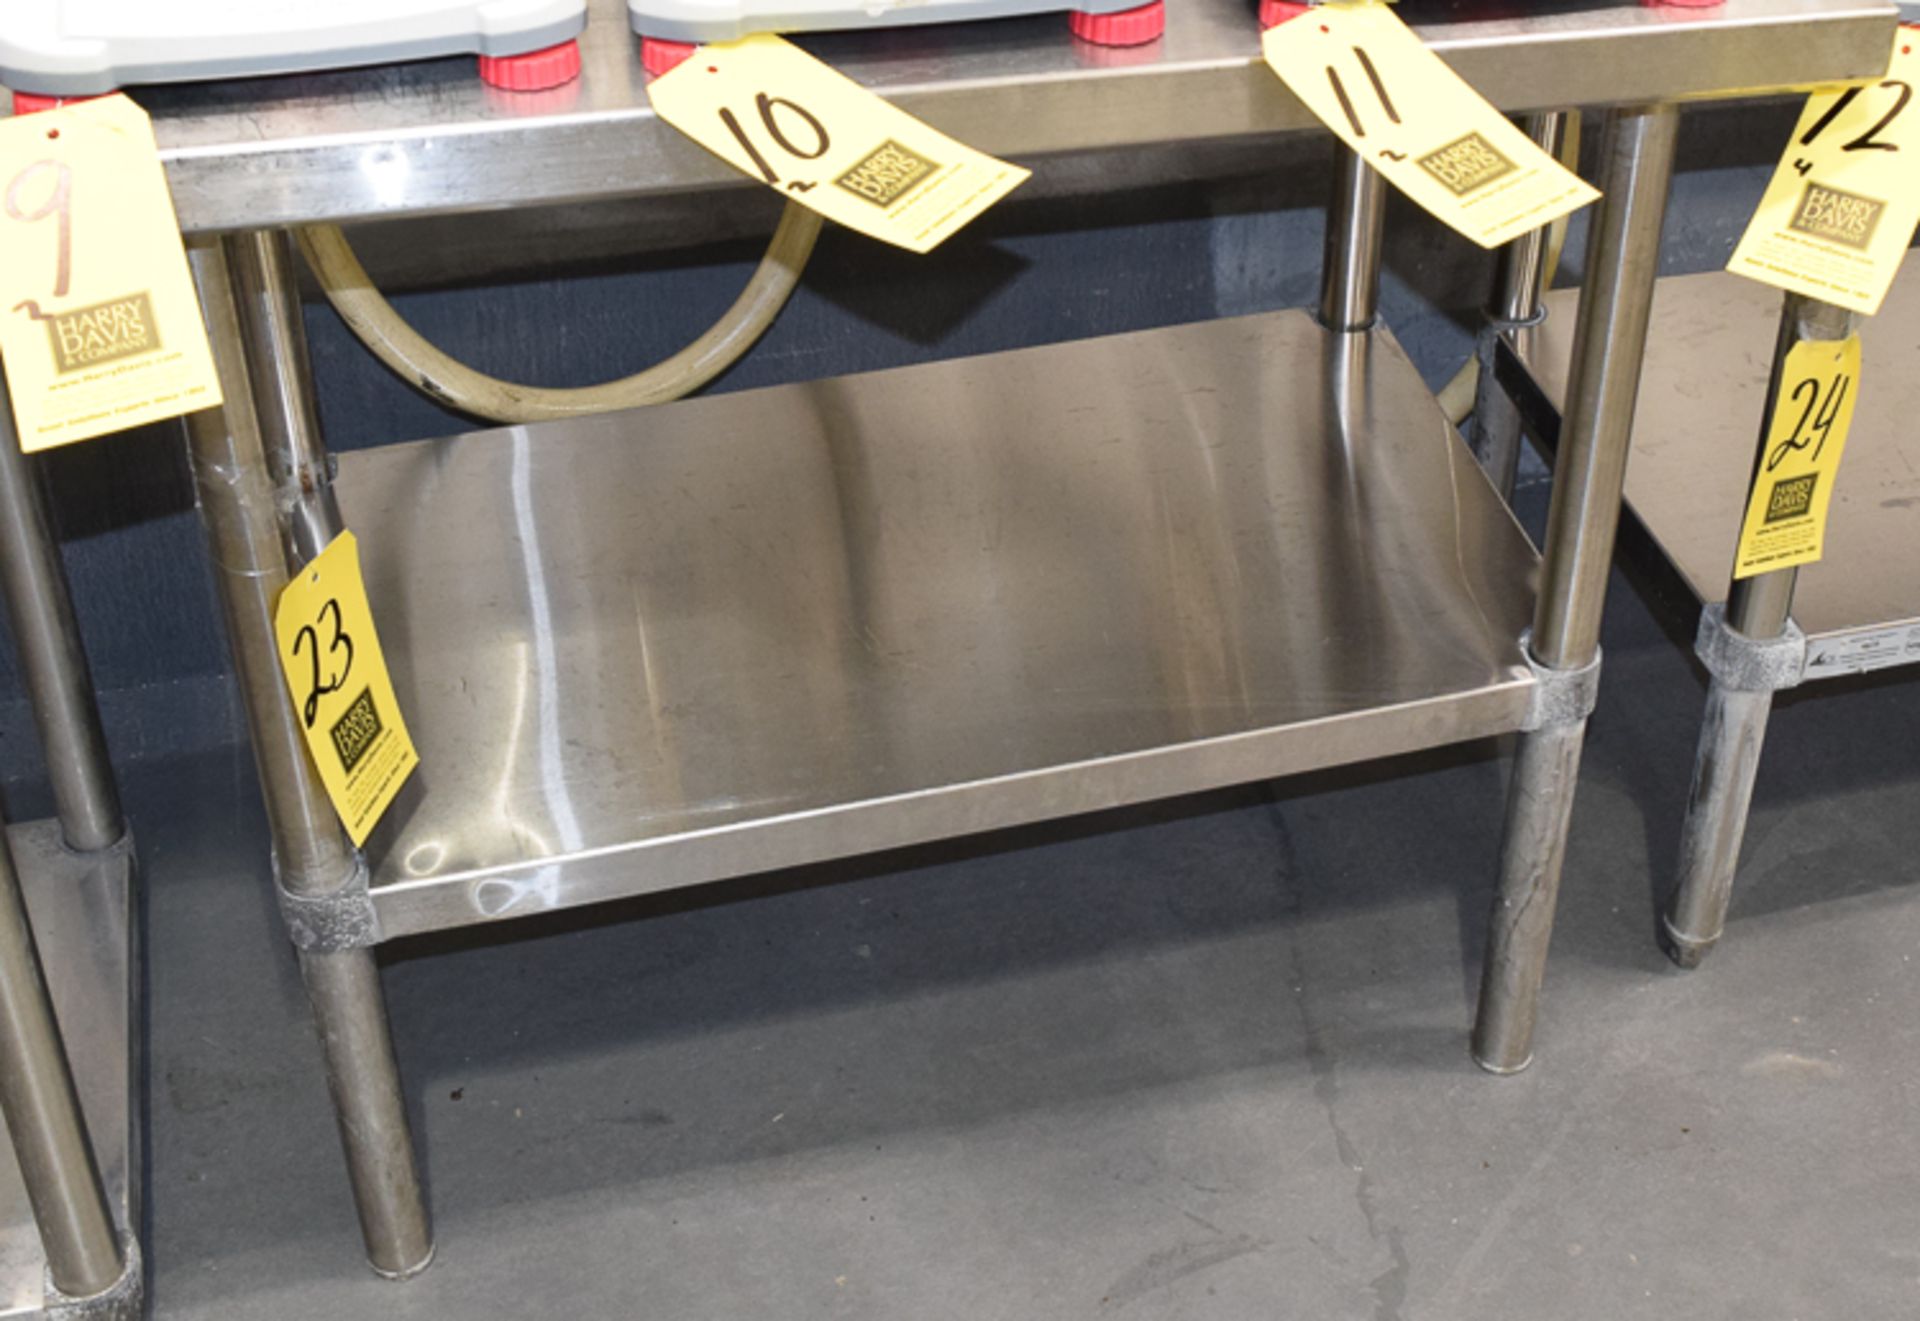 S/S Work Table with Under Shelf, 24" x 36", Rigging Fee: Please Contact US Rigging 920-655-2767